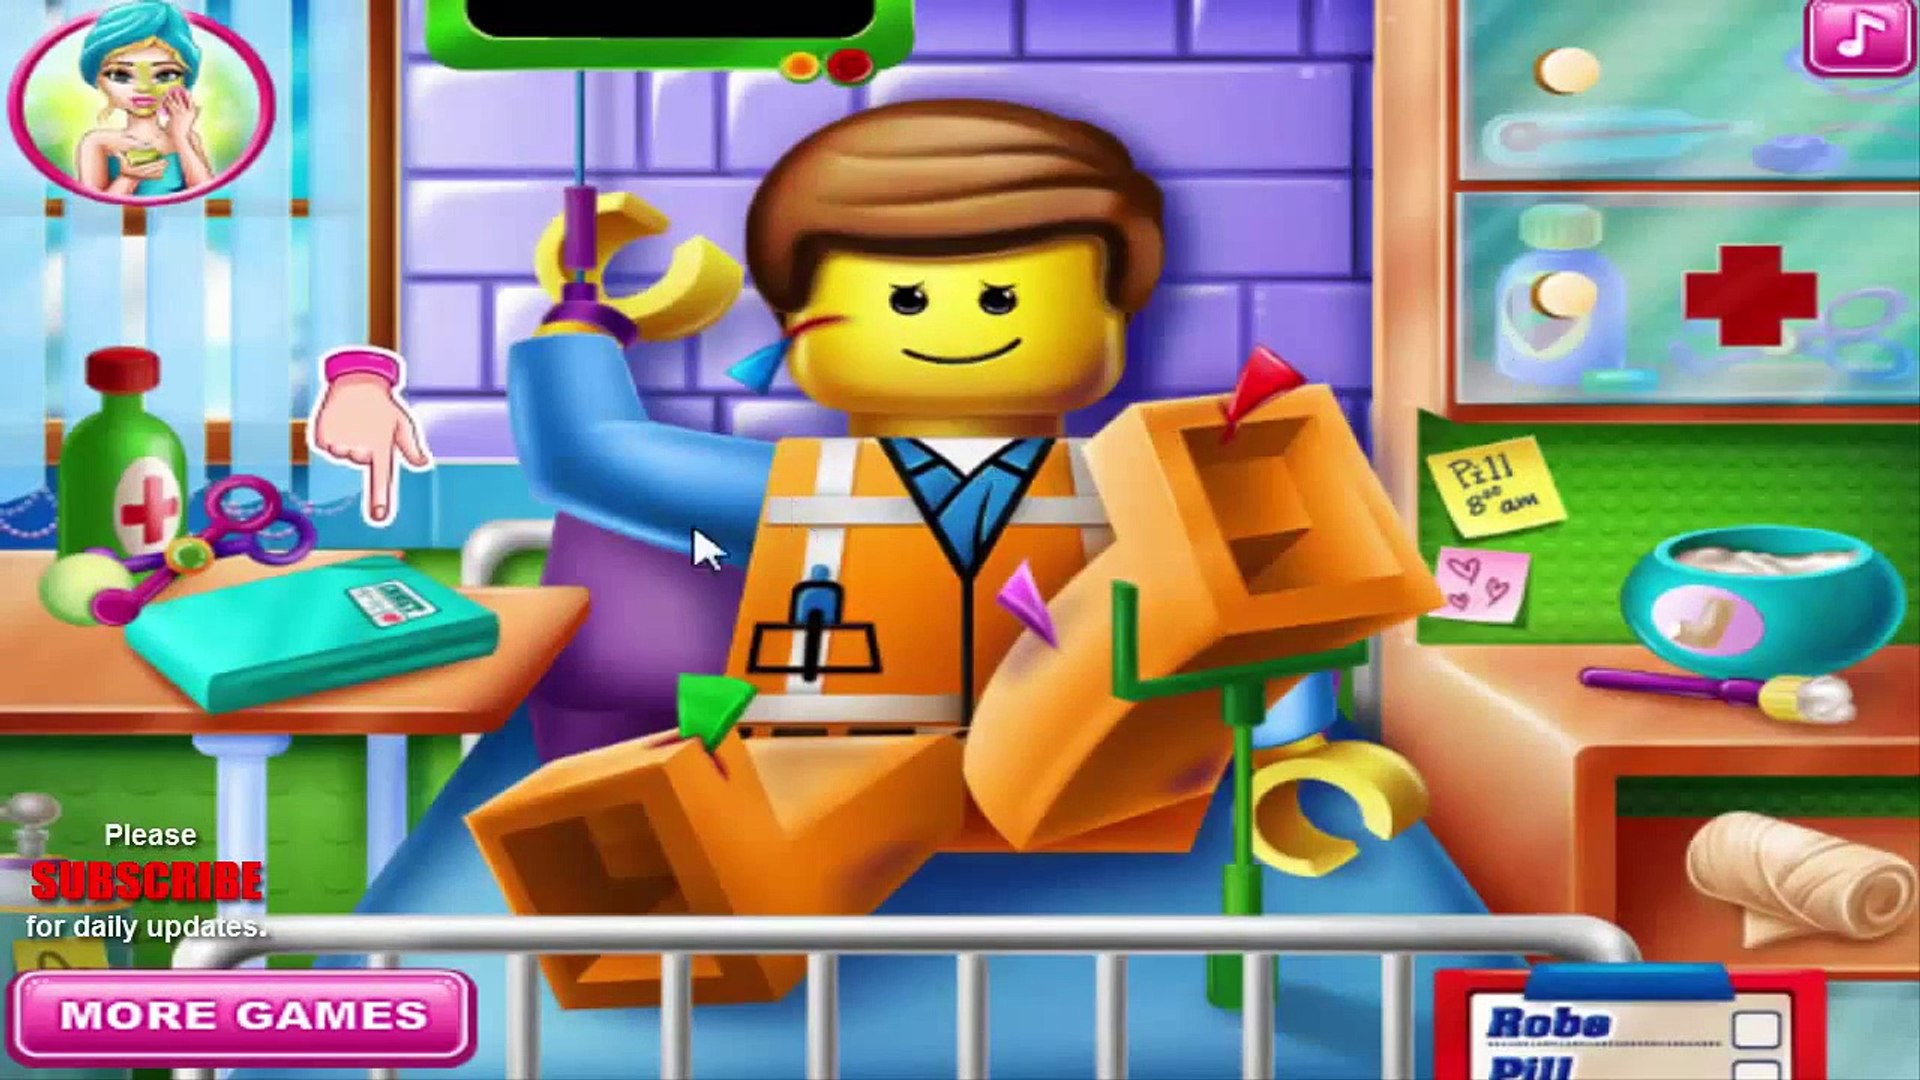 Lego Games - Lego in the hospital_ doctor kids game - Free games online (1)  - video Dailymotion